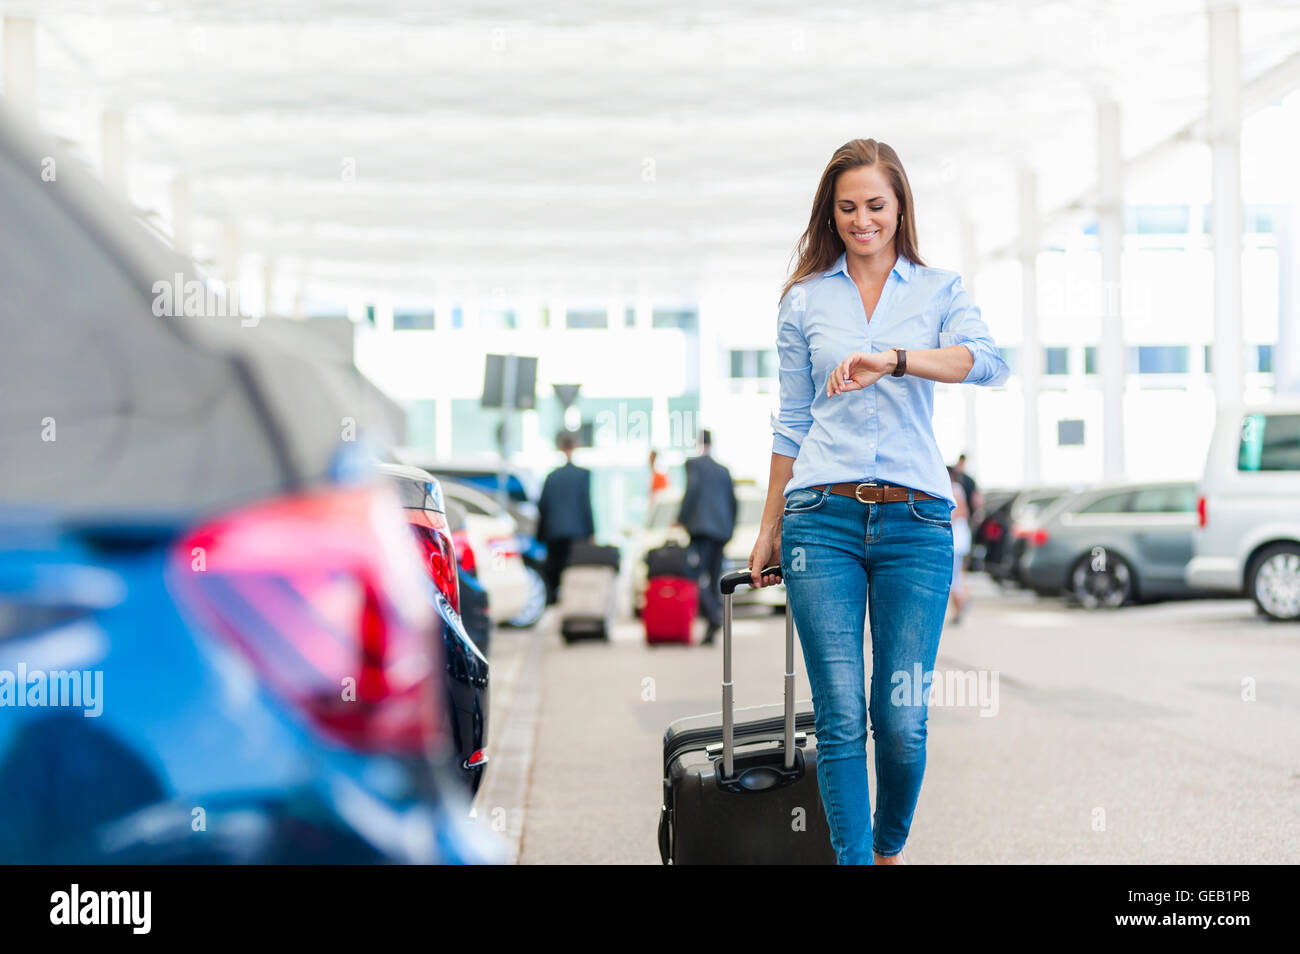 Smiling woman walking with luggage on parking lot Stock Photo